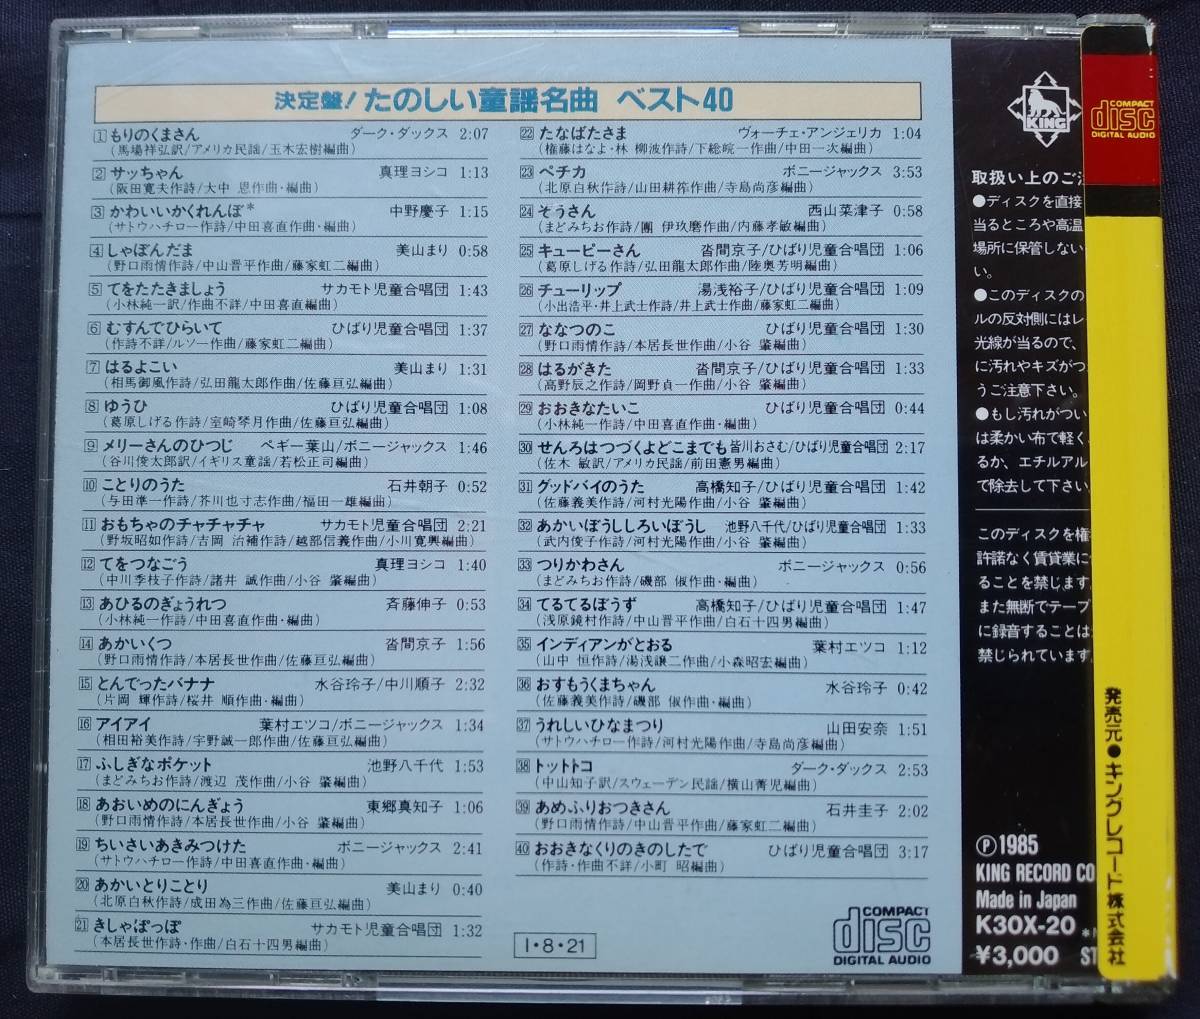 CD decision record! happy nursery rhyme masterpiece the best 40 K30X-20 dark Dux bo knee Jack svo- che * Anne je licca pegi- leaf mountain middle ... water ...